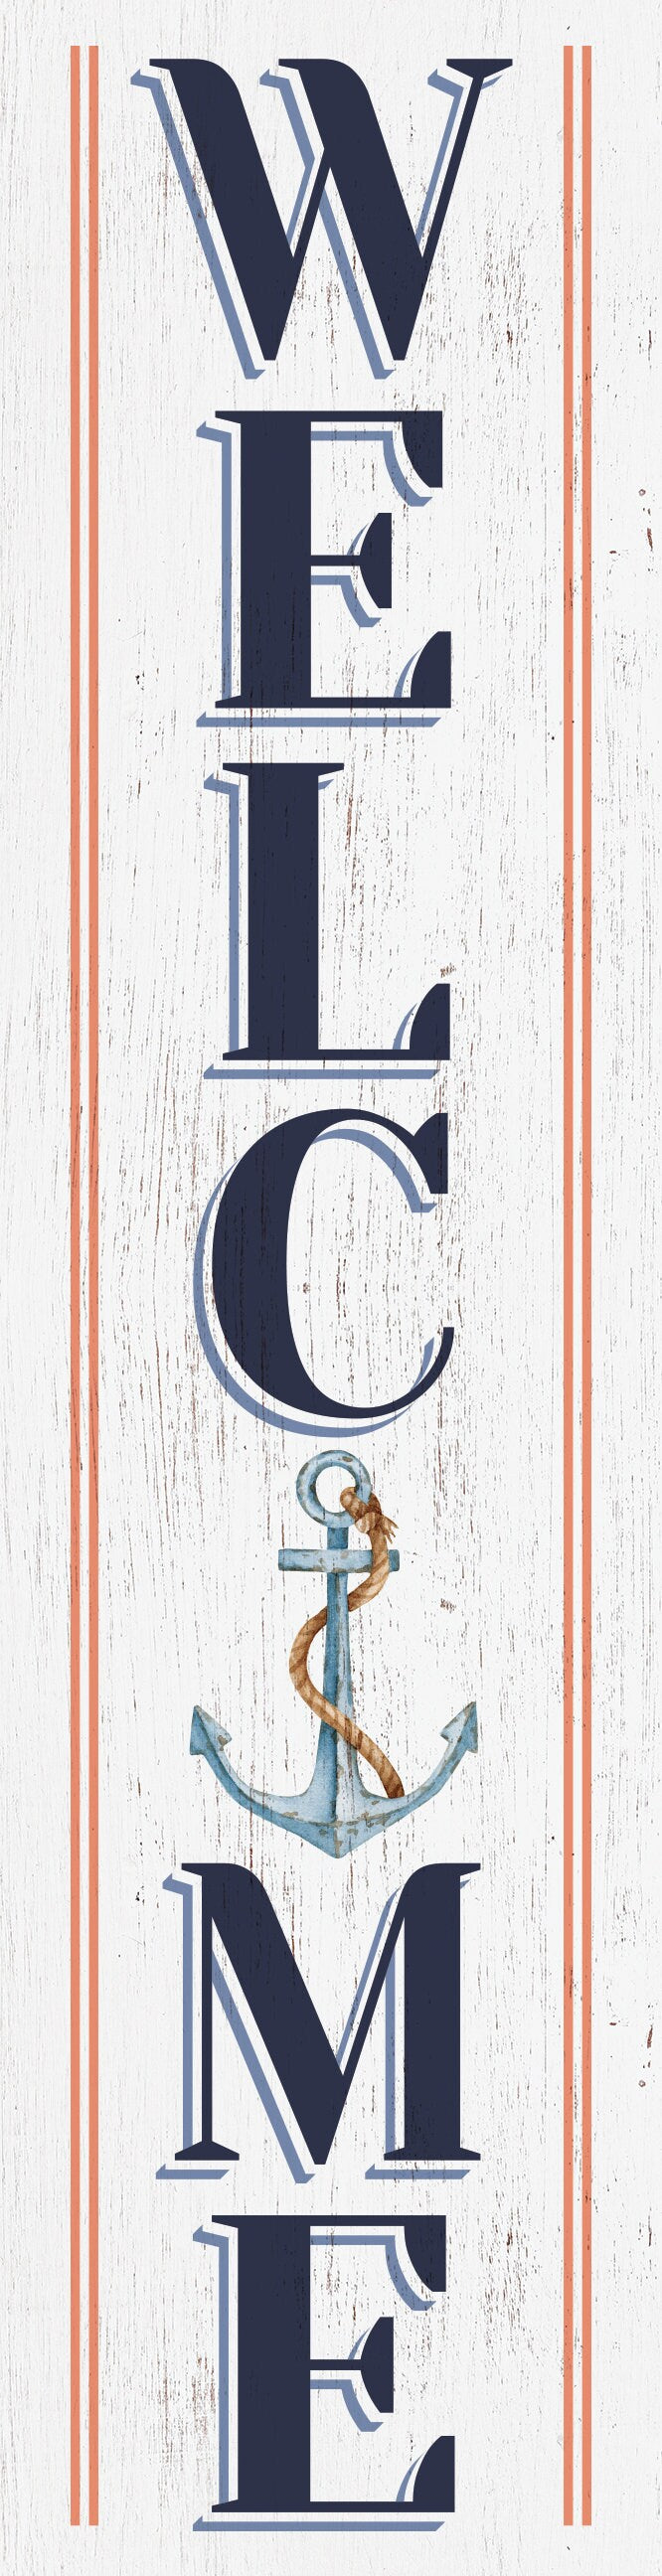 36in Anchor Welcome Porch Sign for Front Door, Nautical-Themed Summer Wall Decor, Coastal Home Accent, Outdoor Seaside Display